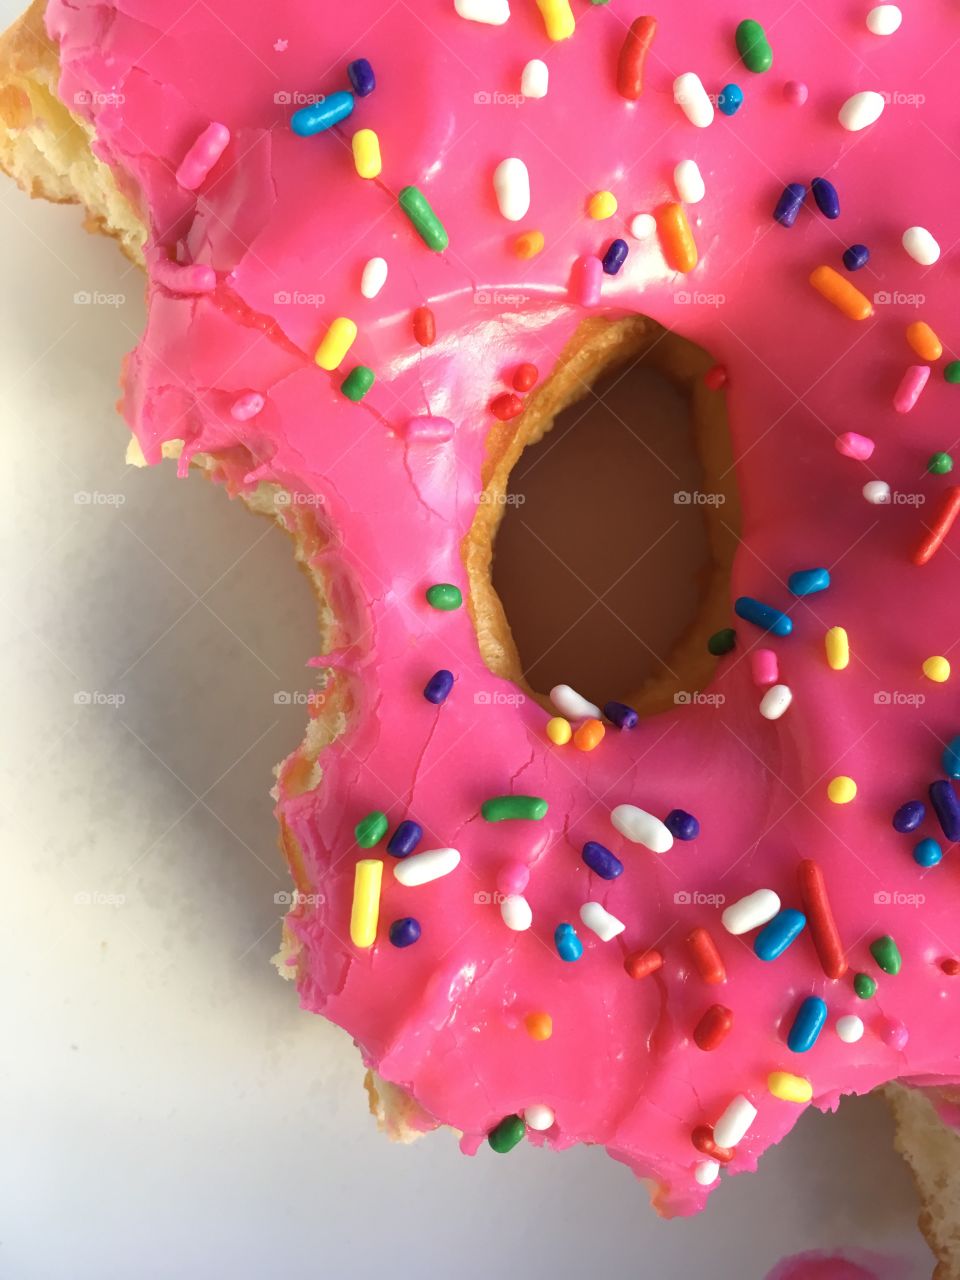 The Big Pink donut